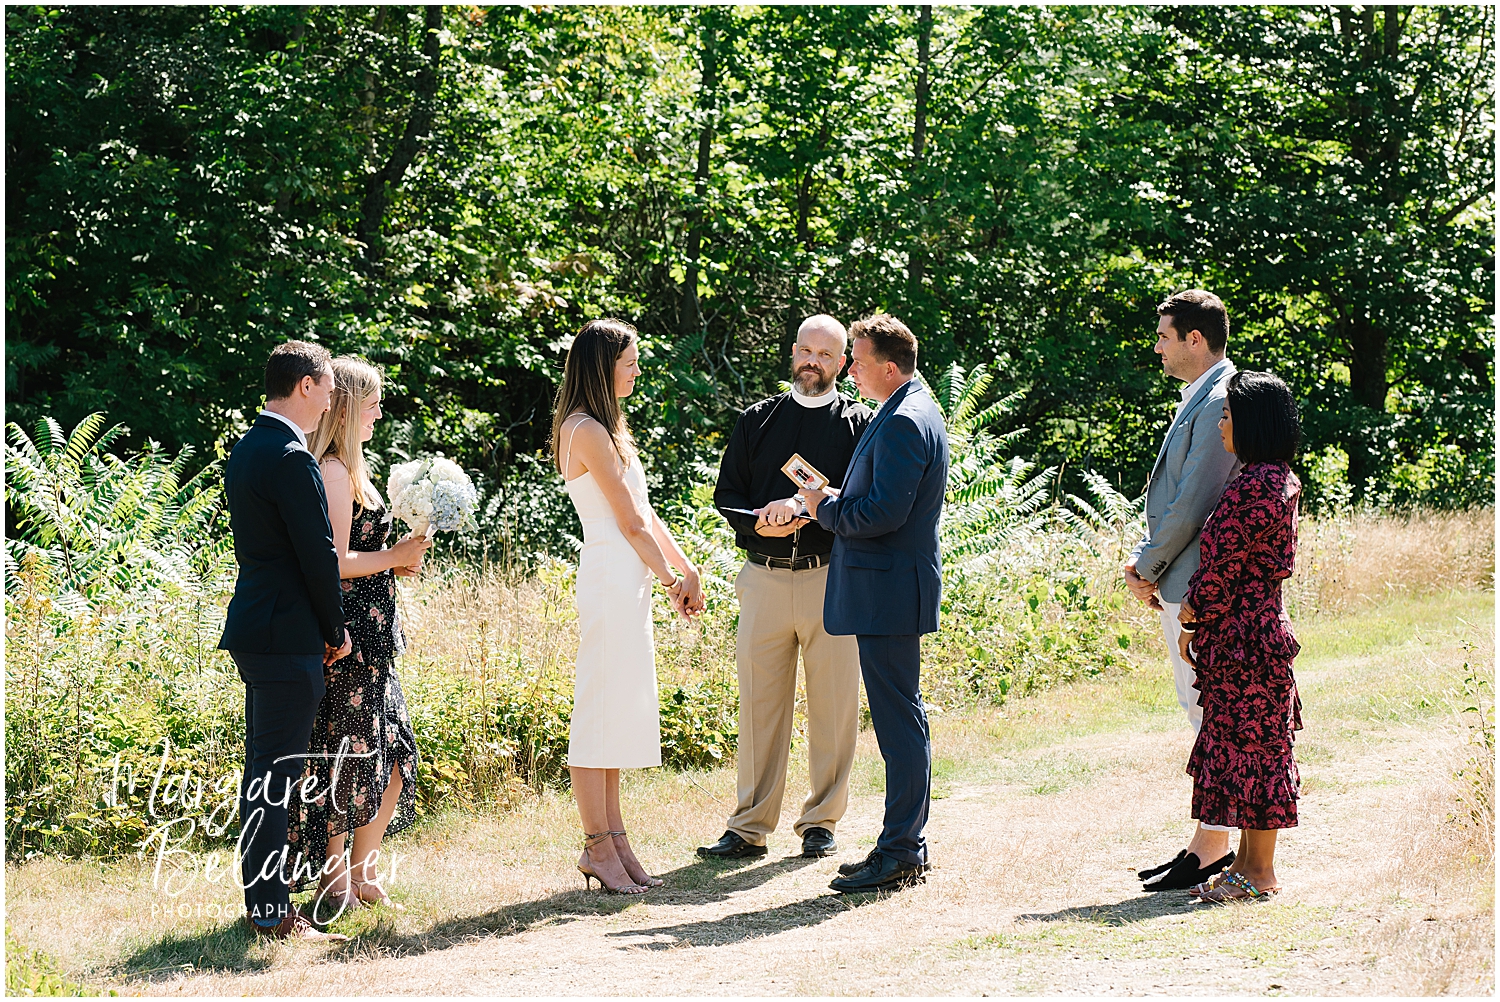 Outdoor wedding ceremony with a couple exchanging vows, officiant and attendees watching.